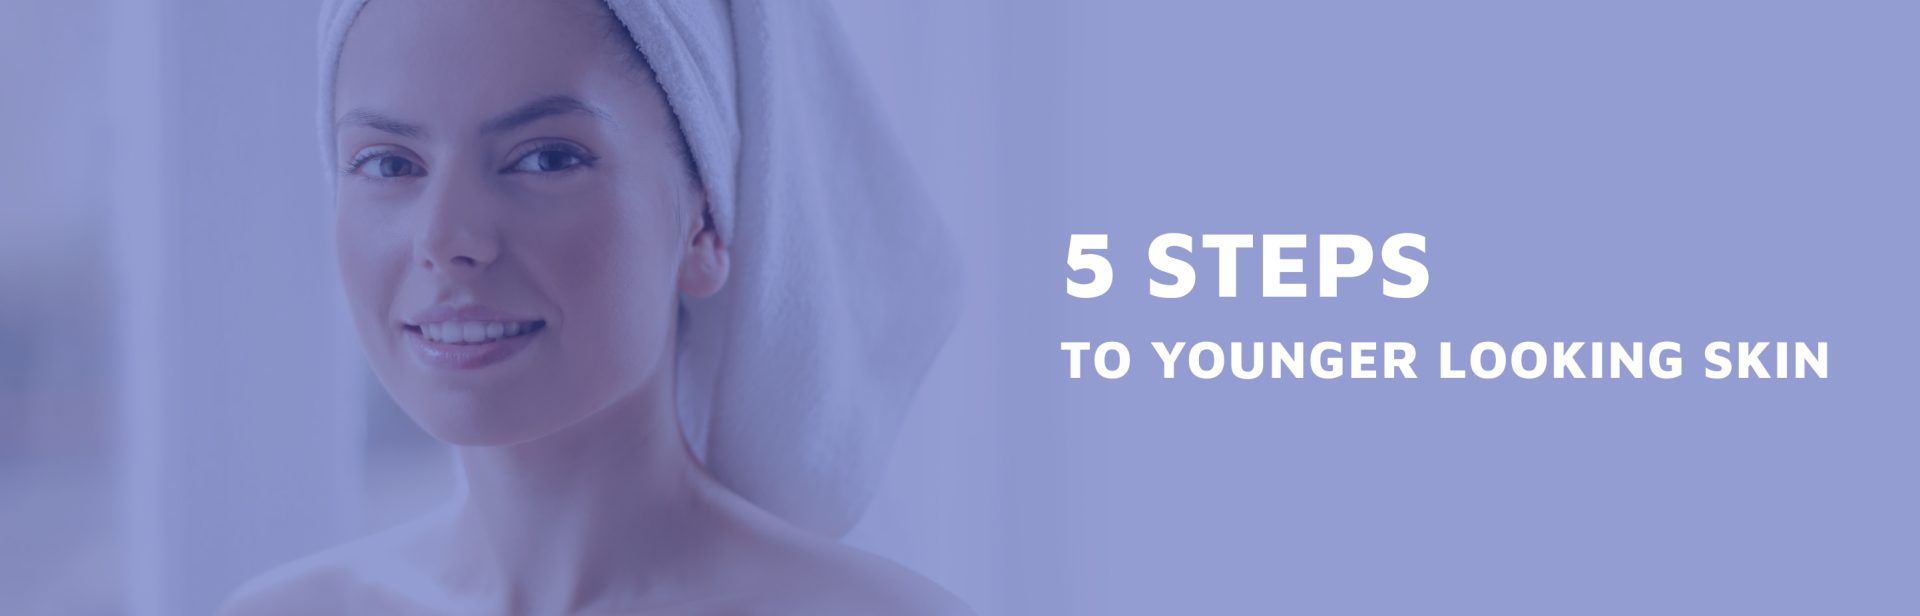 5-Steps-To-Younger-Looking-Skin